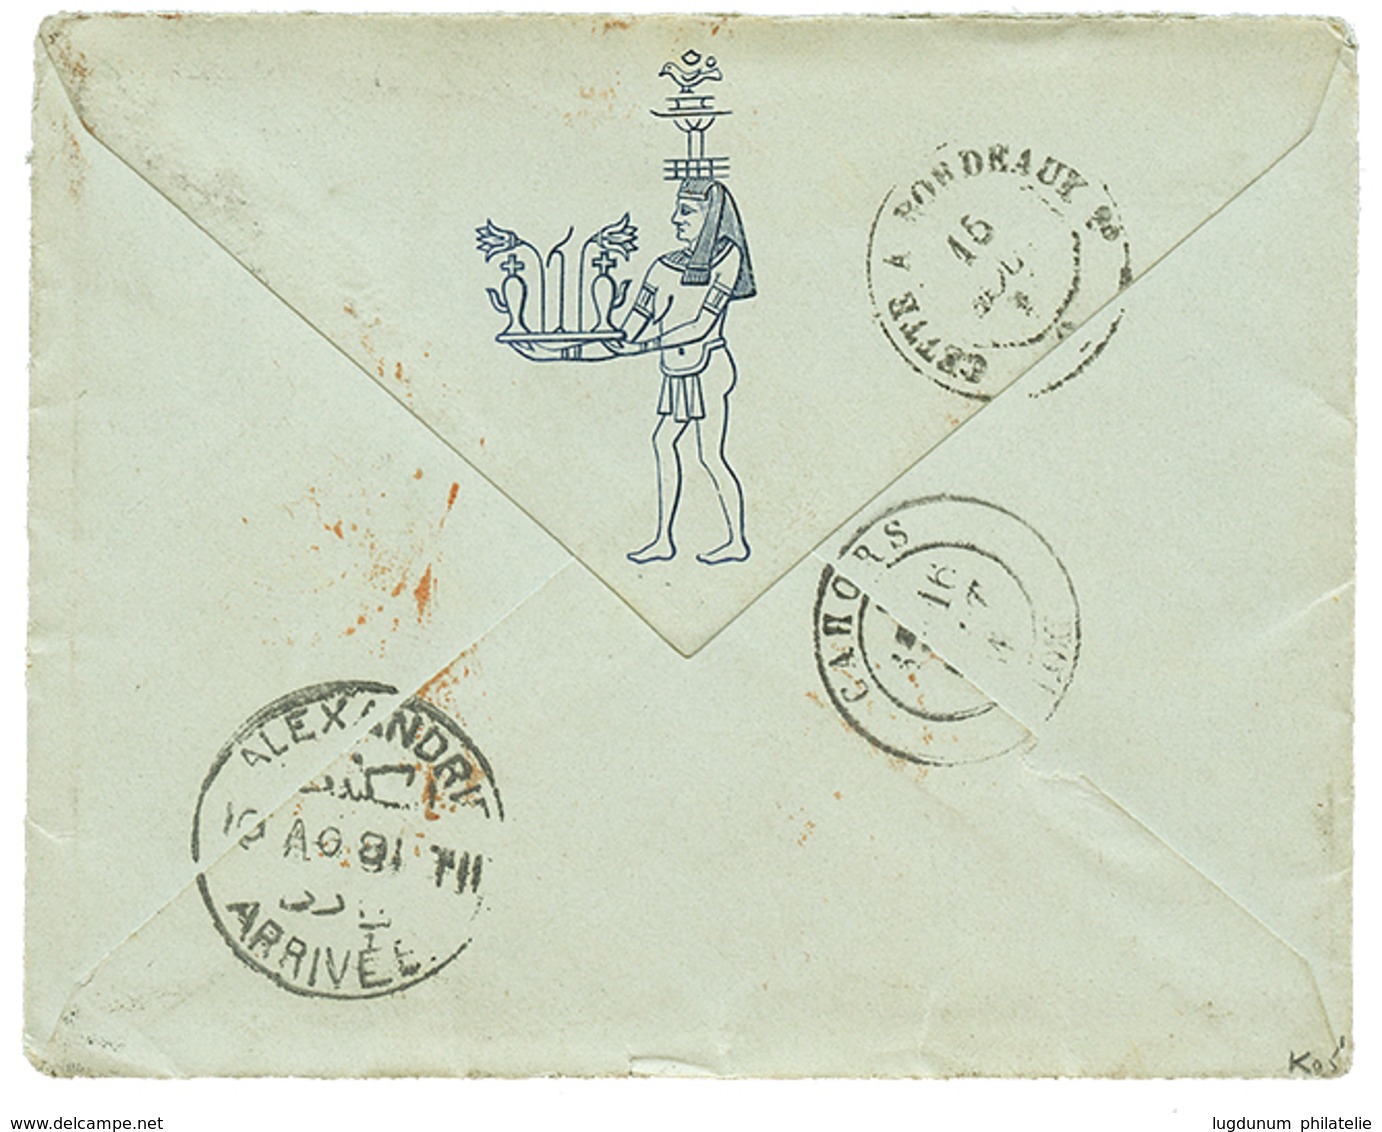 "PALESTINE - RAMLEH " : 1881 EGYPT 1p Canc. RETTA On Envelope With Full Text (6 Pages) Datelined "RAMLEH 9 Aout 1881" To - Palästina